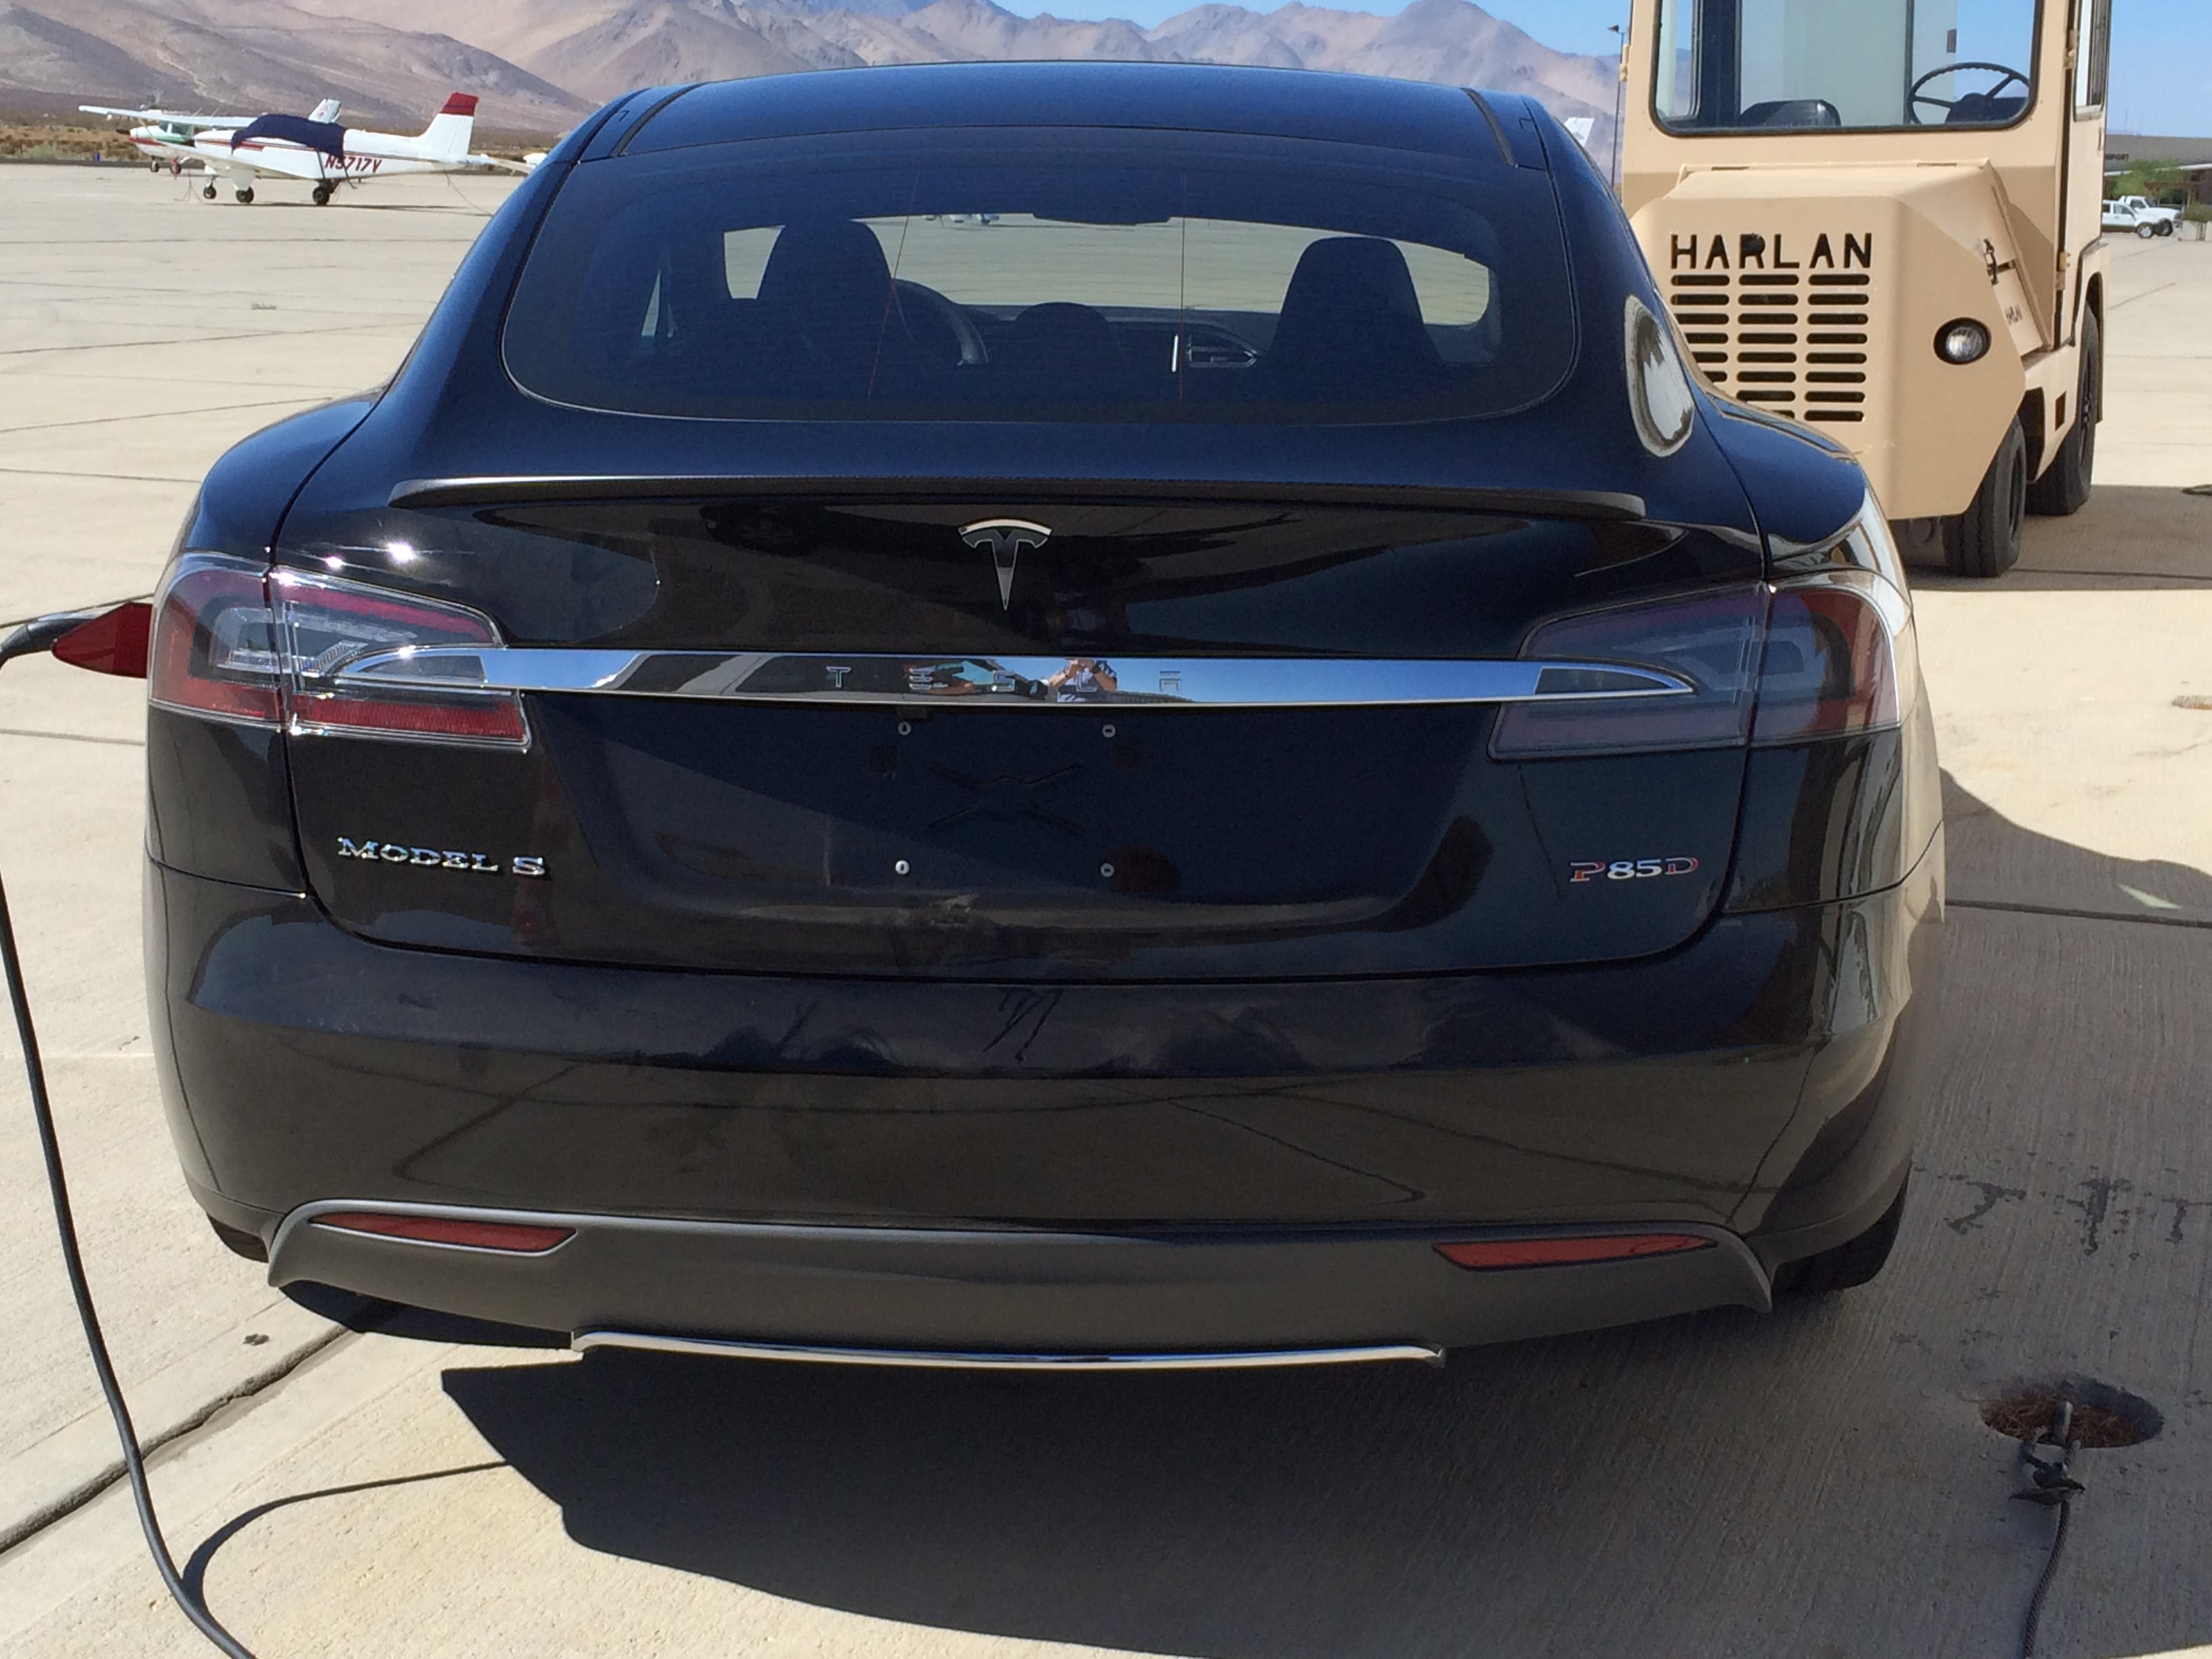 Tesla Model S P85D Specifications Revealed Two Engines, AWD, Very Fast